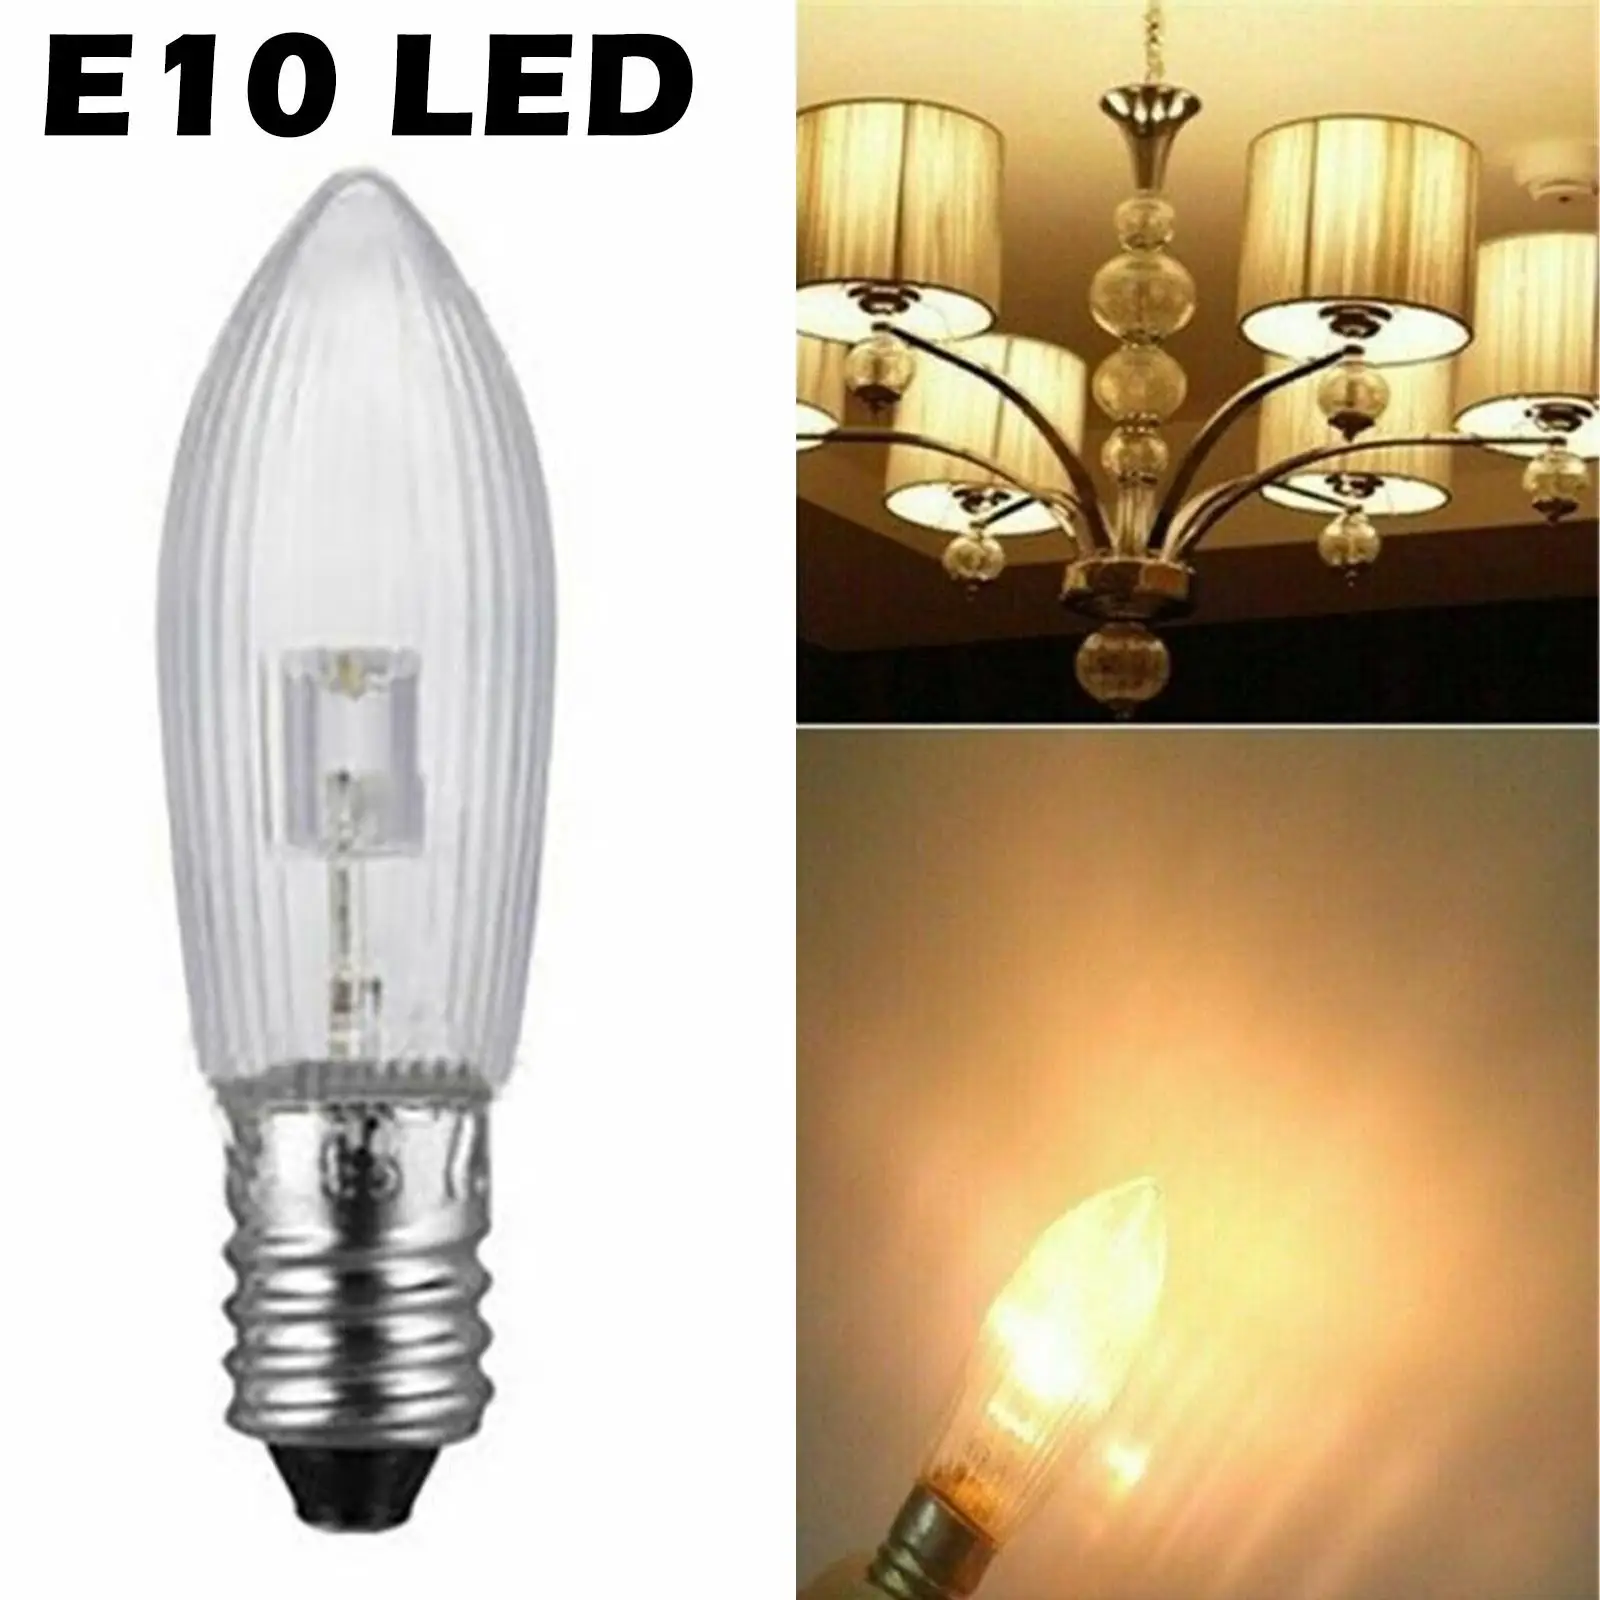 1pc E10 LED Bulbs Light Replacement Lamp Bulbs 10V-55V AC Bathroom Kitchen Home Lamps Bulb Decoration Lights For String Lig O5Q8 ineonlife neon signboard custom coffee cup drinks bar club restaurant kitchen room warm bedroom home wall decoration